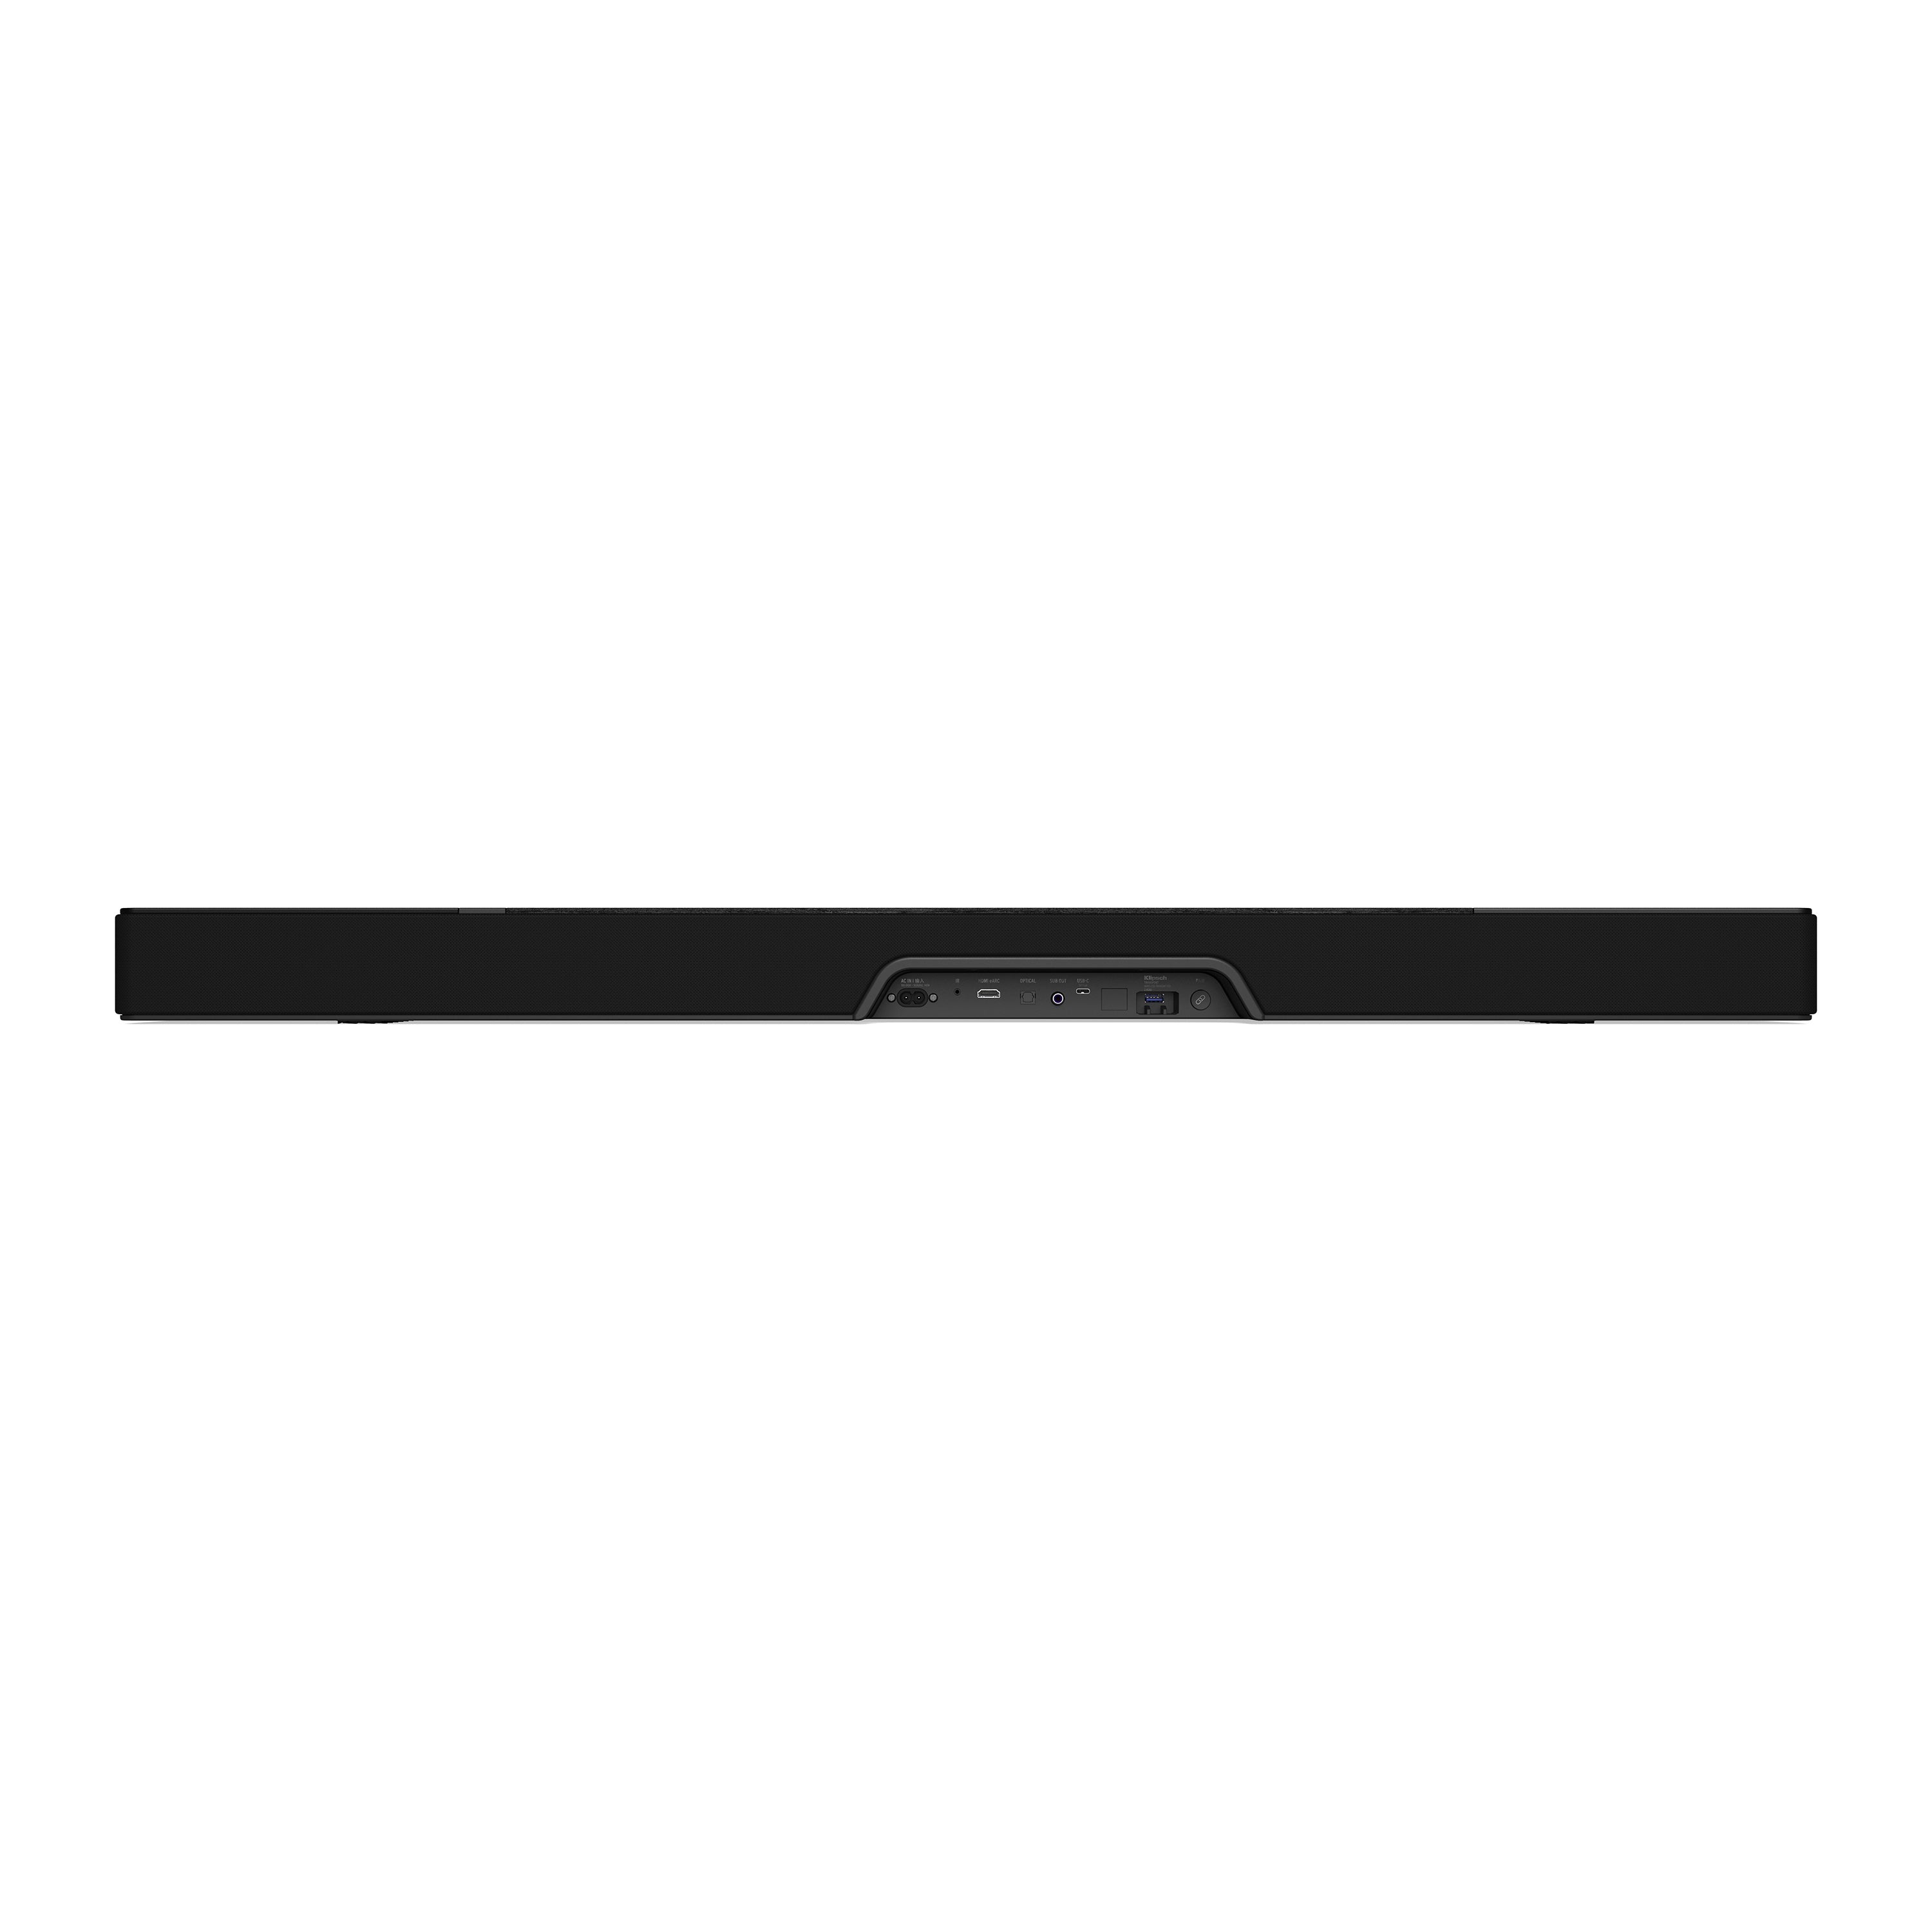 Flexus Core 200 Dolby Atmos Sound Bar with Elevation Speakers